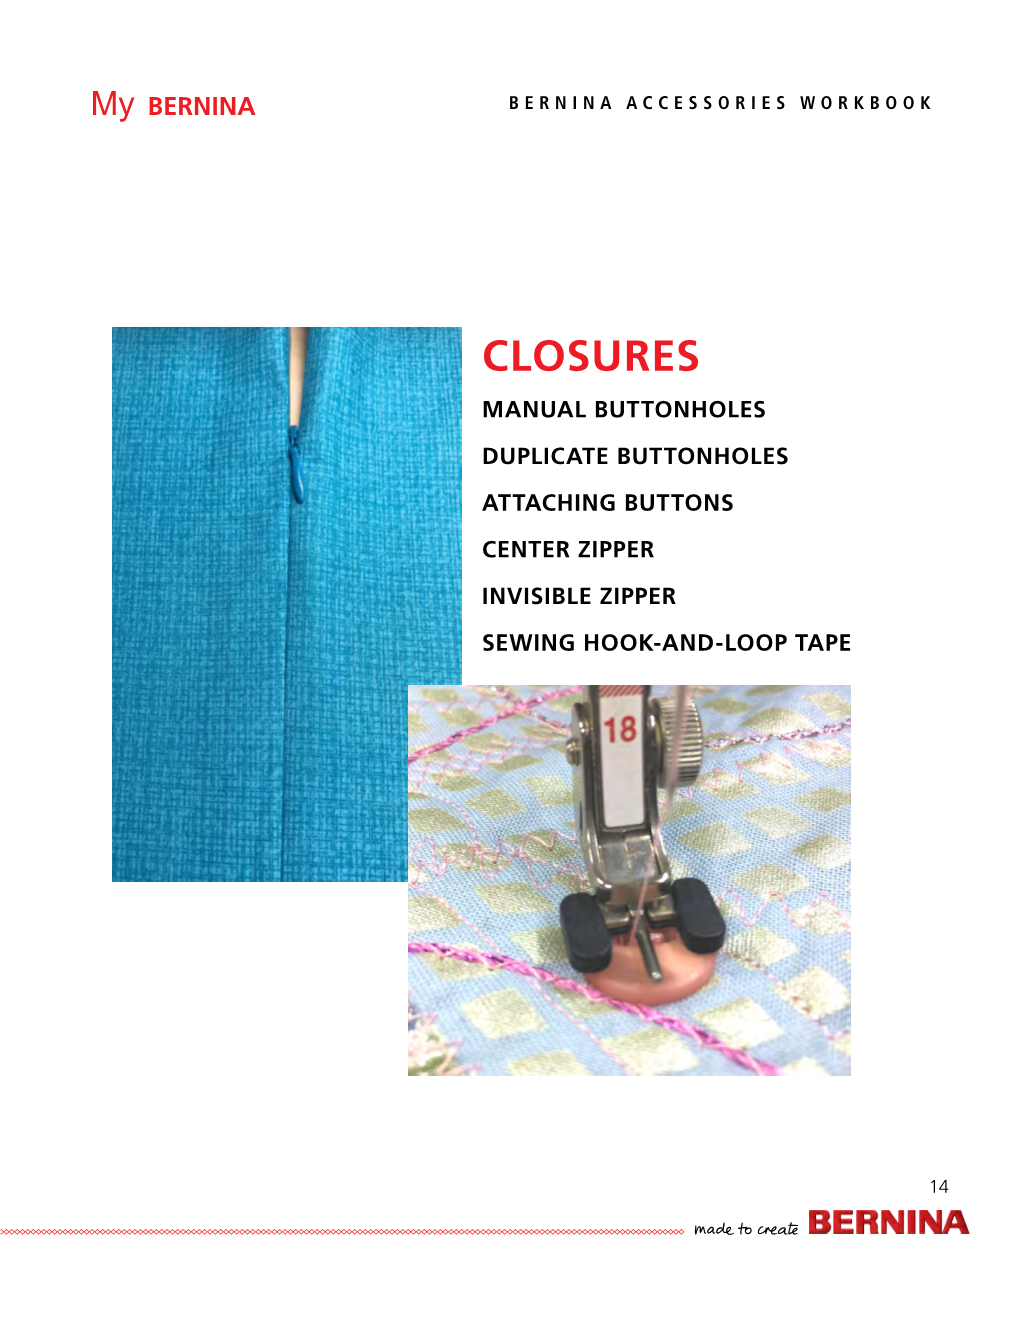 Closures Manual Buttonholes Duplicate Buttonholes Attaching Buttons Center Zipper Invisible Zipper Sewing Hook-And-Loop Tape